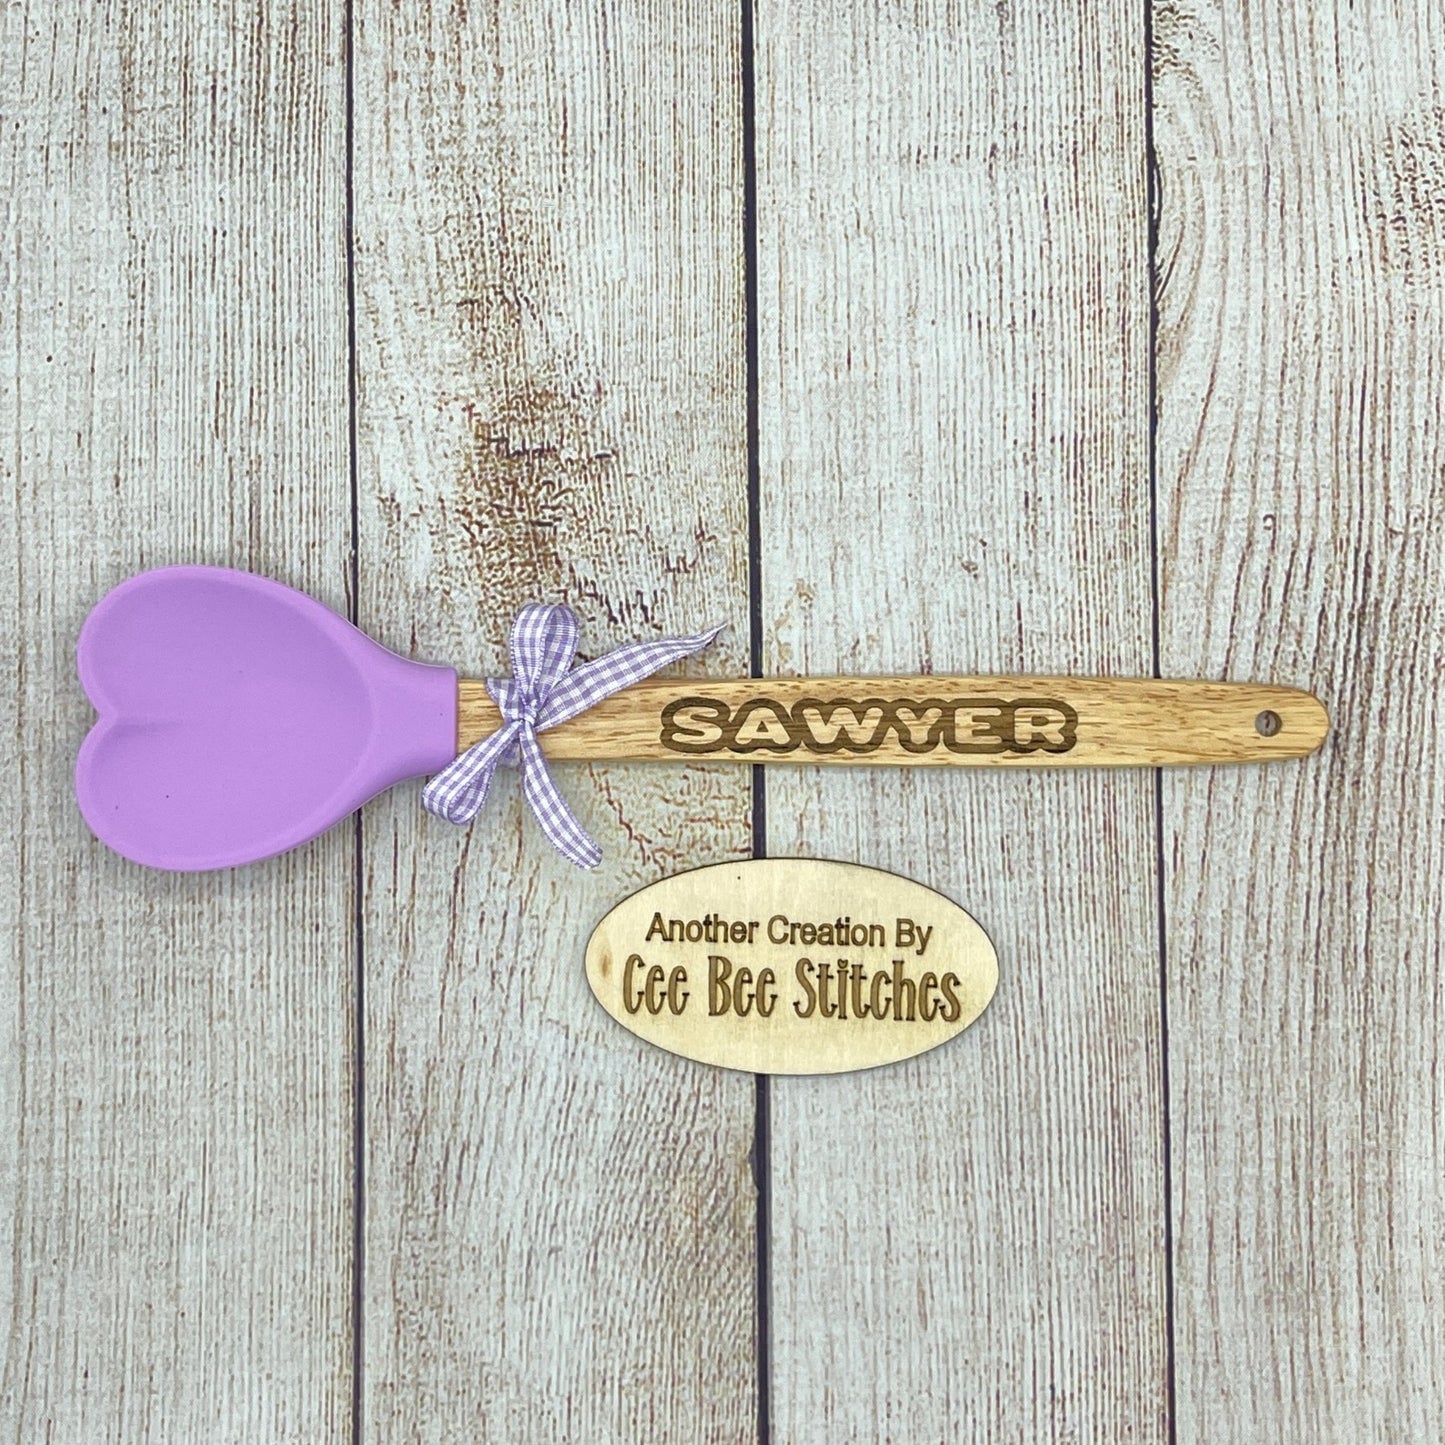 One Personalized Heart Shaped Silicone Spatula for Kids or Adults with Name Engraved in wood handle